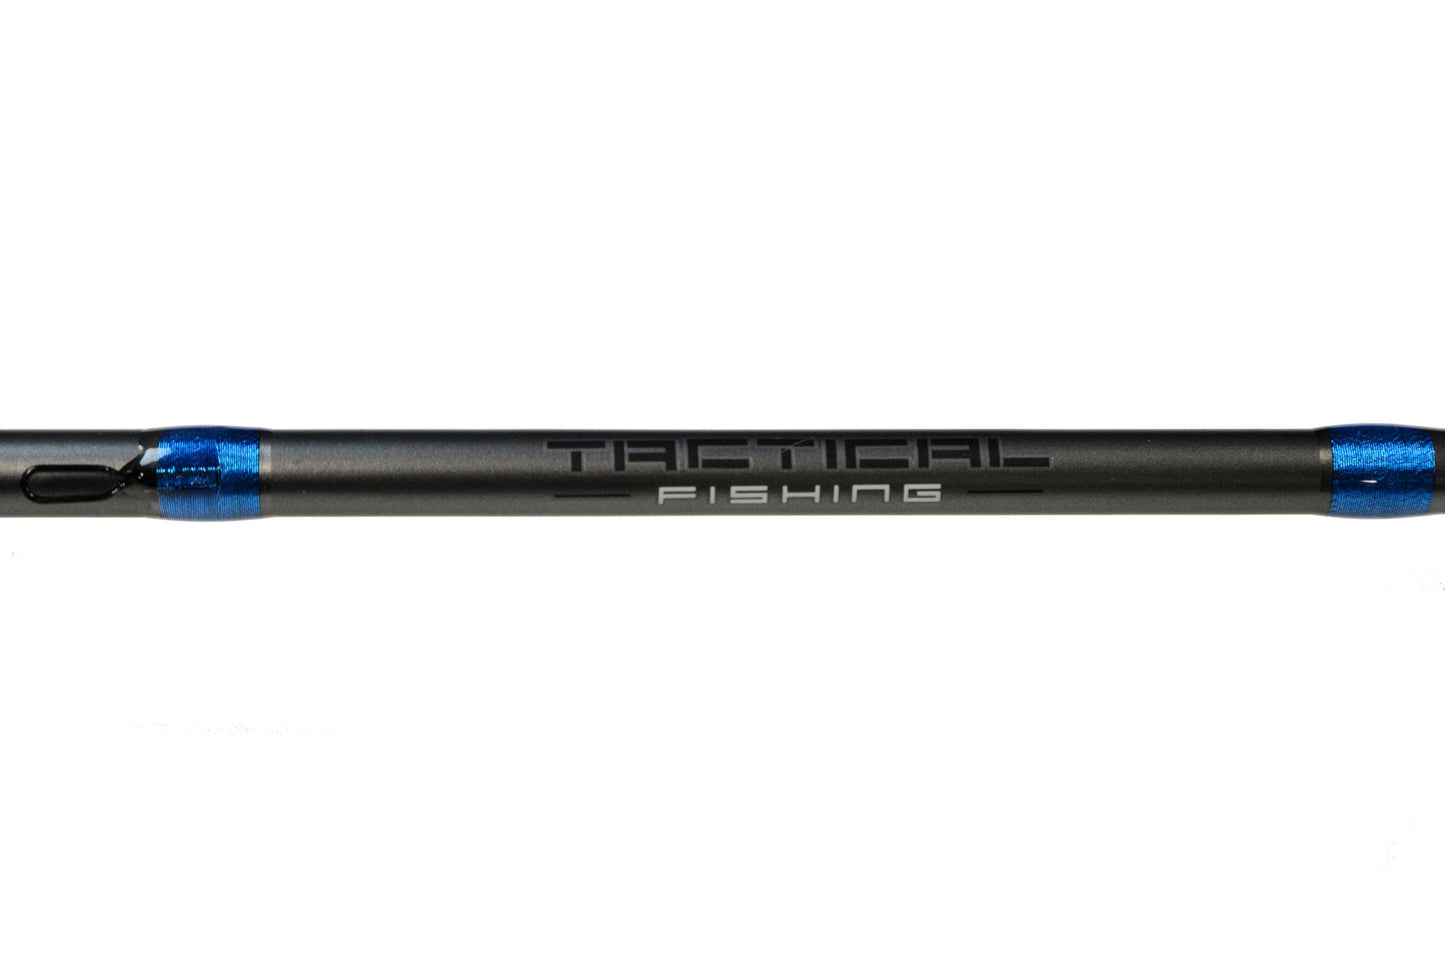 Tactical Fishing Gear 7'2" Tube Special Rod